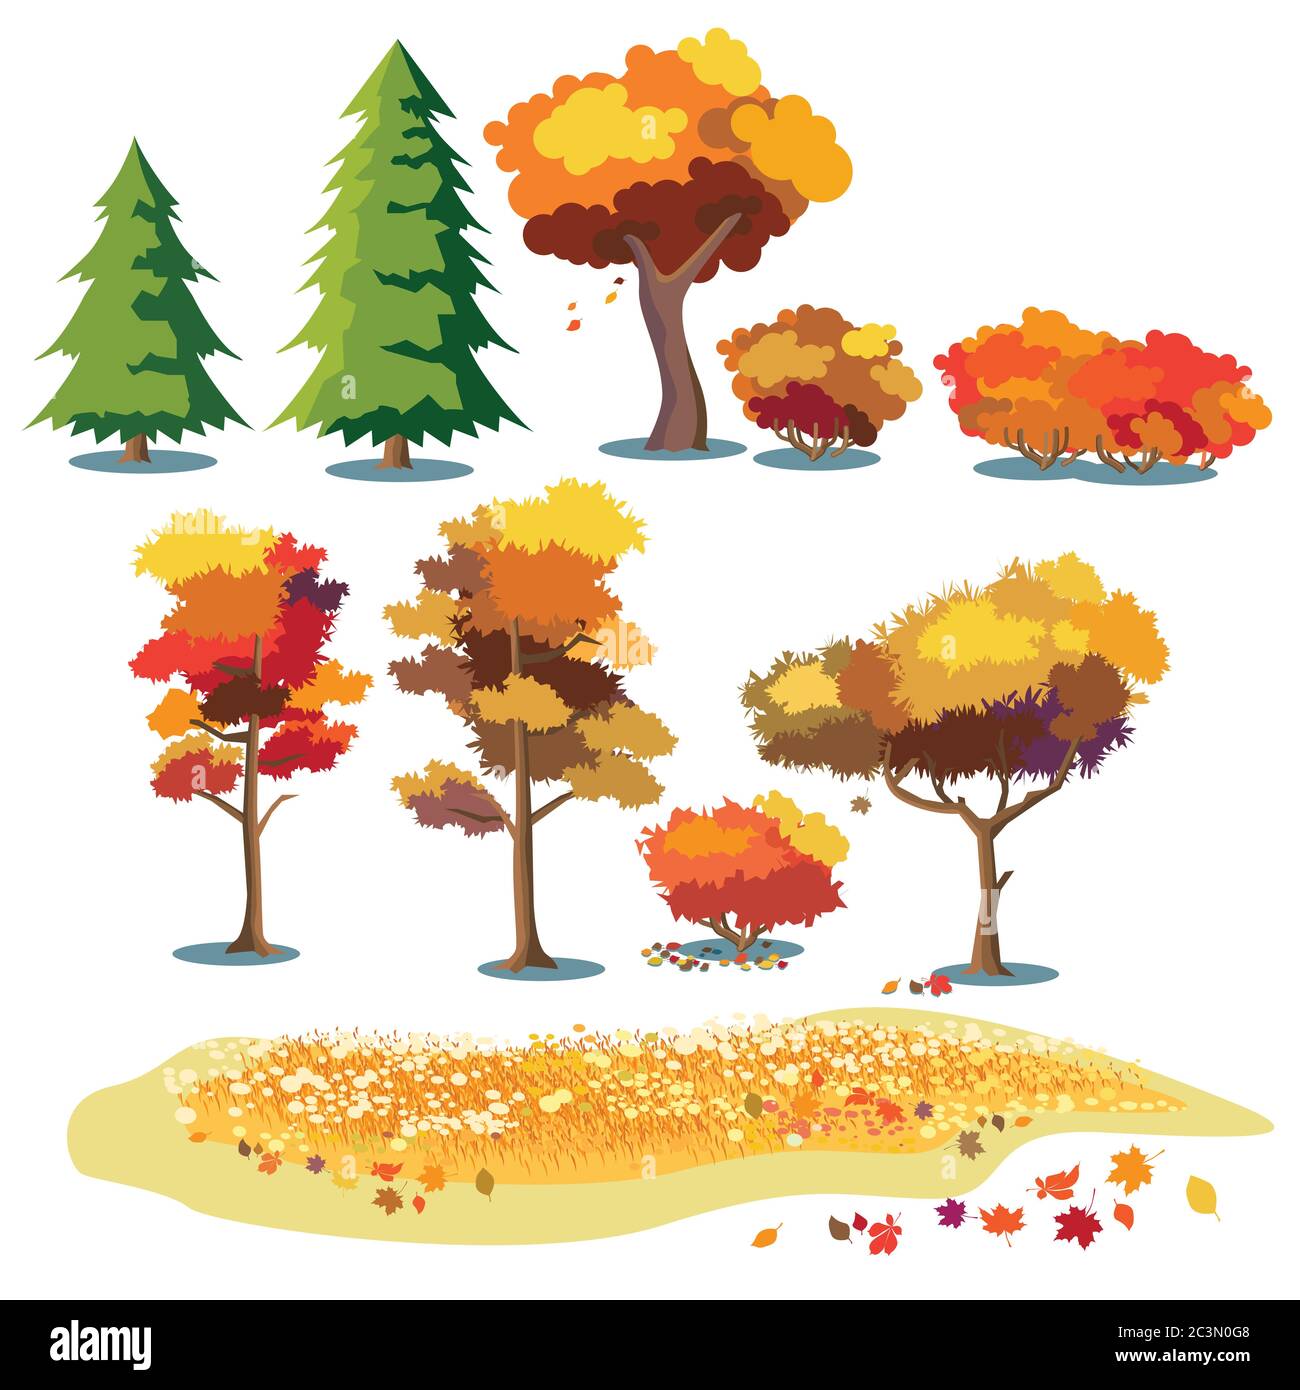 Set of stylized vector plants in autumn colors. Shrubs, trees, leaves, and fields with grass and flowers Stock Vector